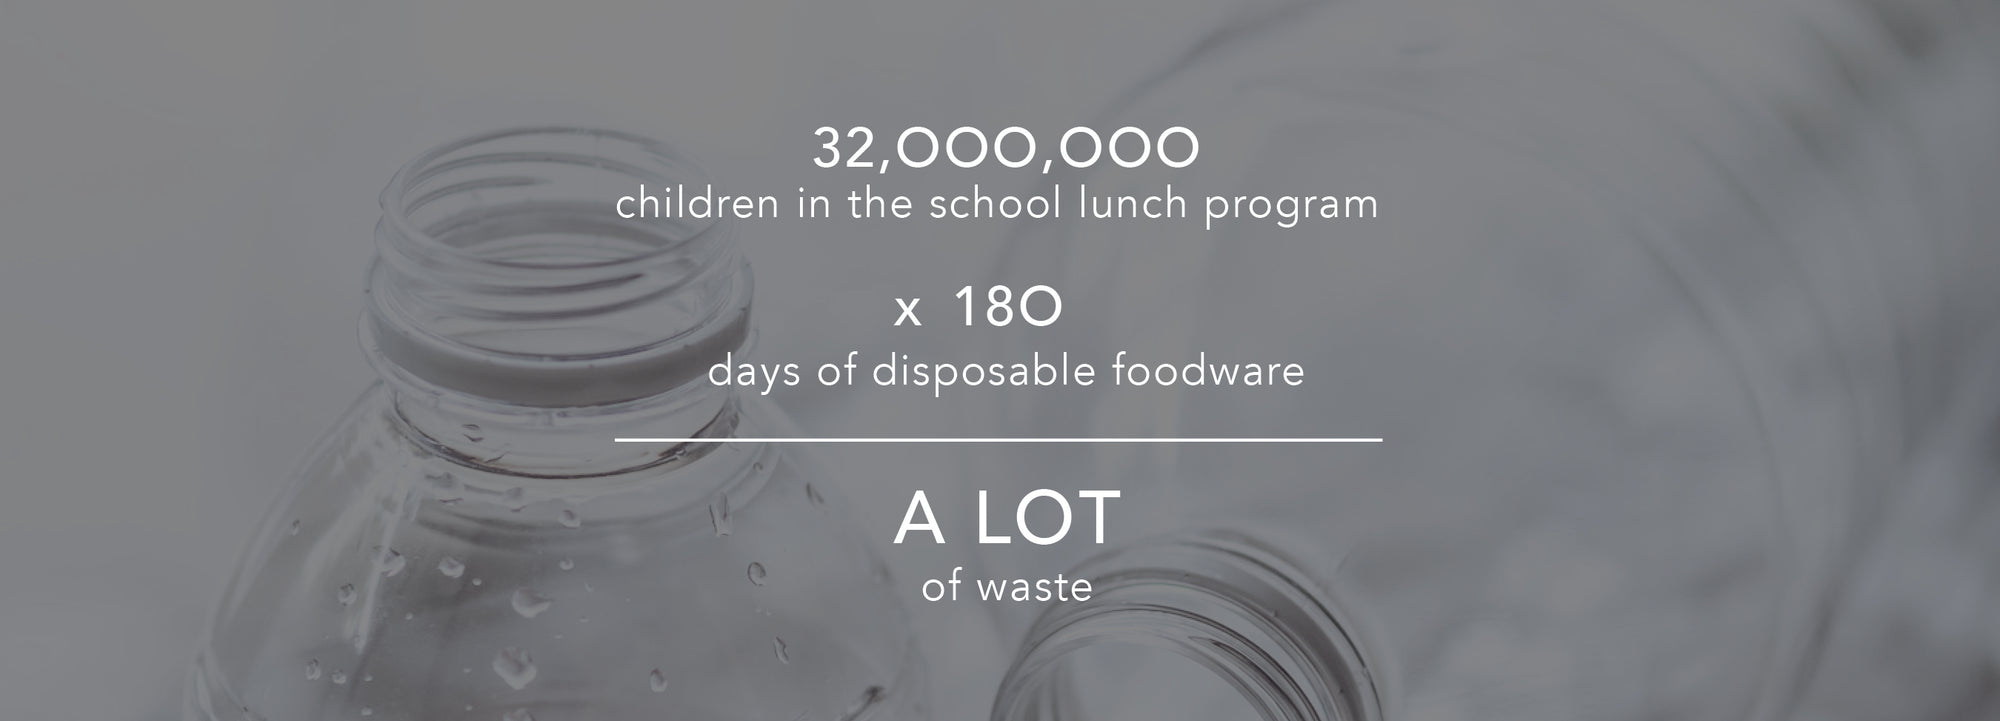 Reusable foodware. Restaurant supplies. 32,000,000 children in the school lunch program times 180 days of disposable foodware equals A LOT OF WASTE